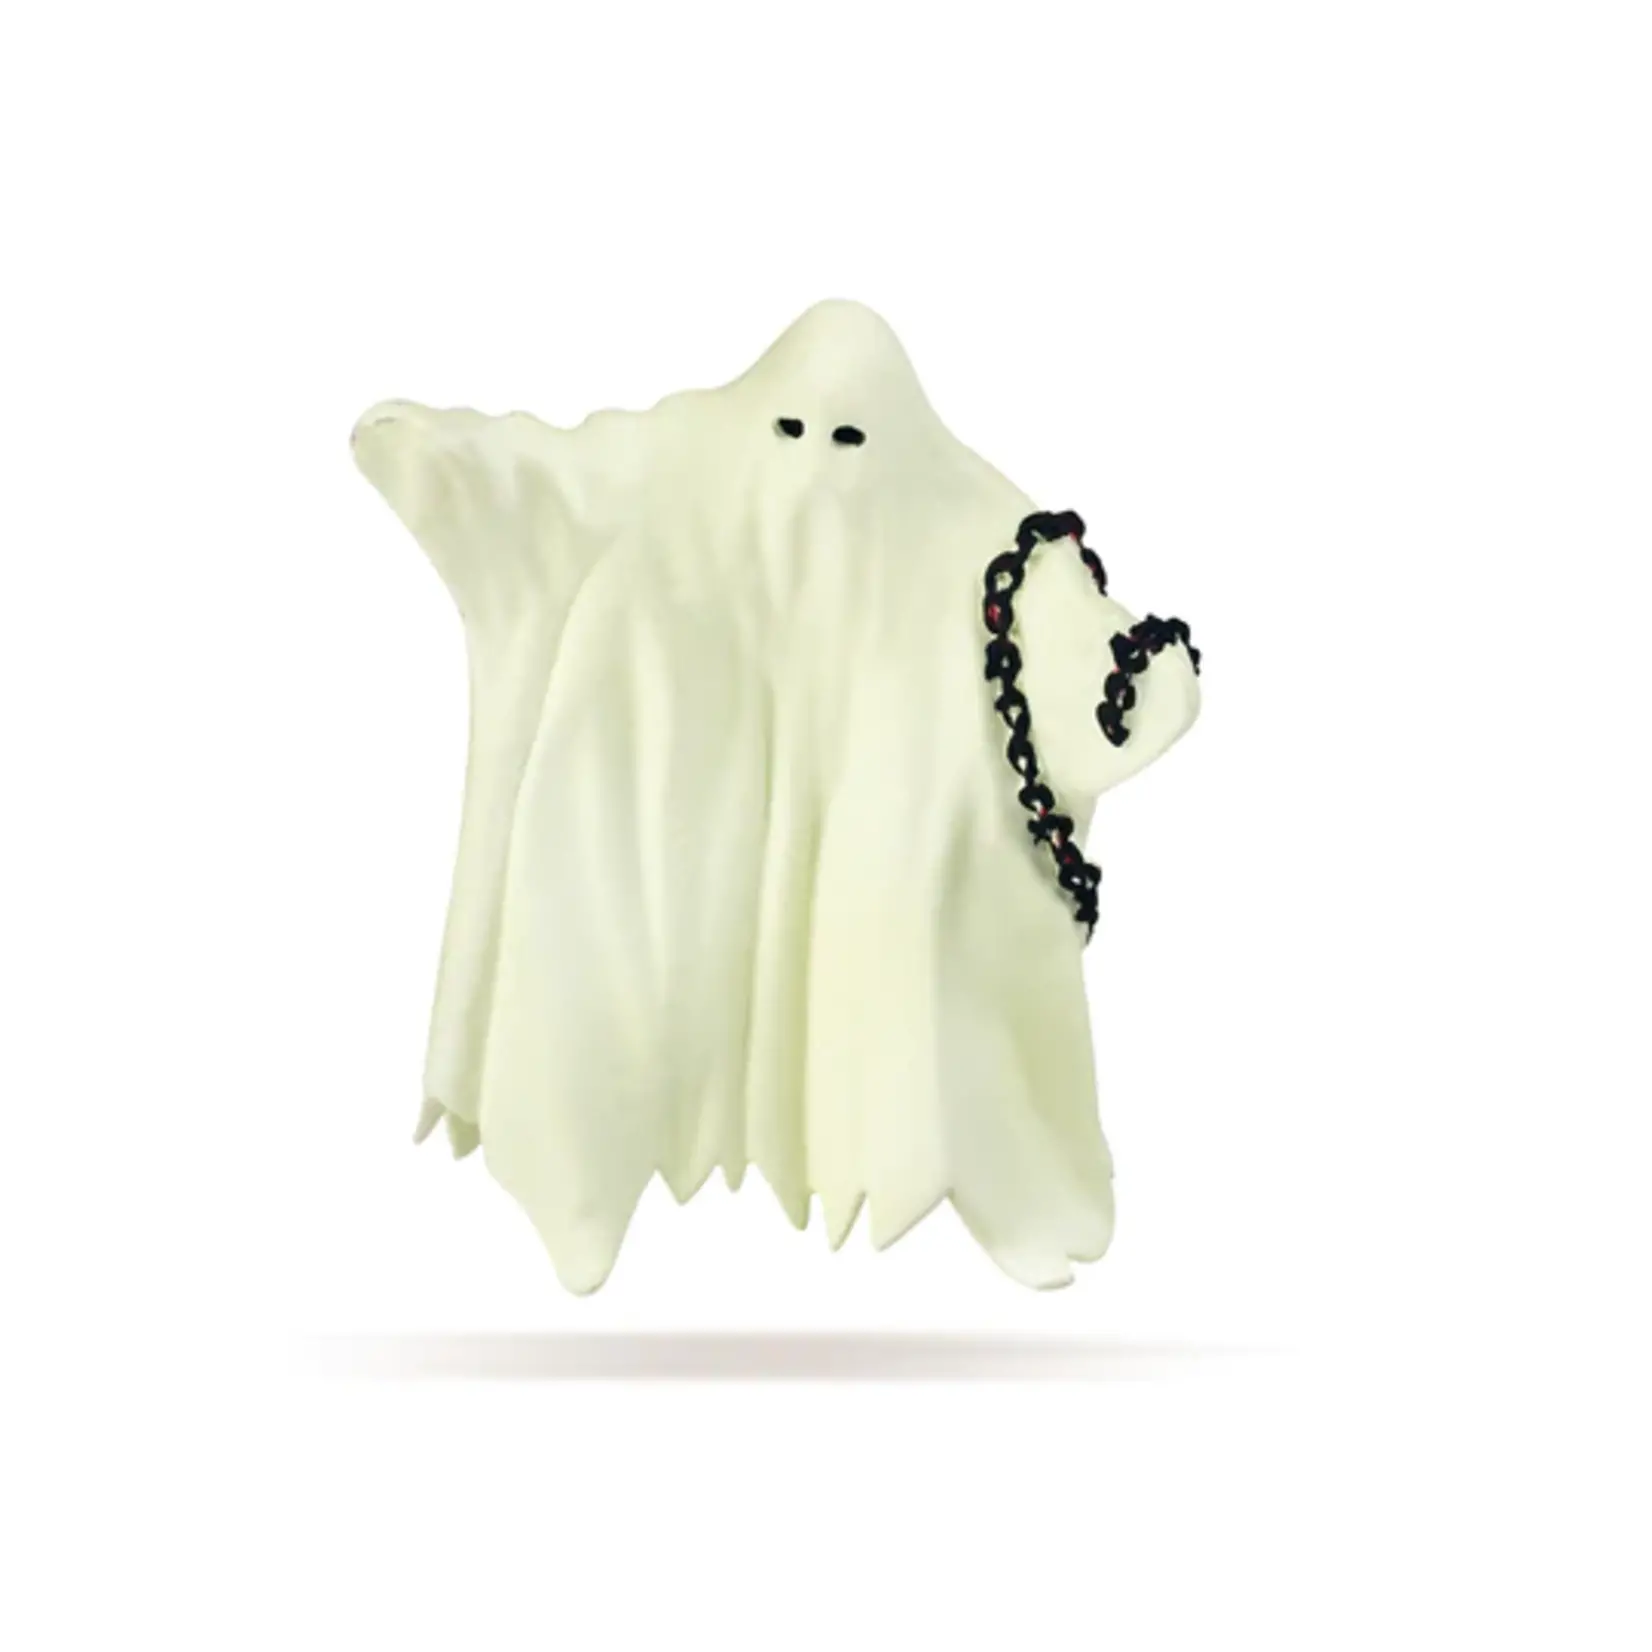 Ghost Glow in the Dark Papo Figure